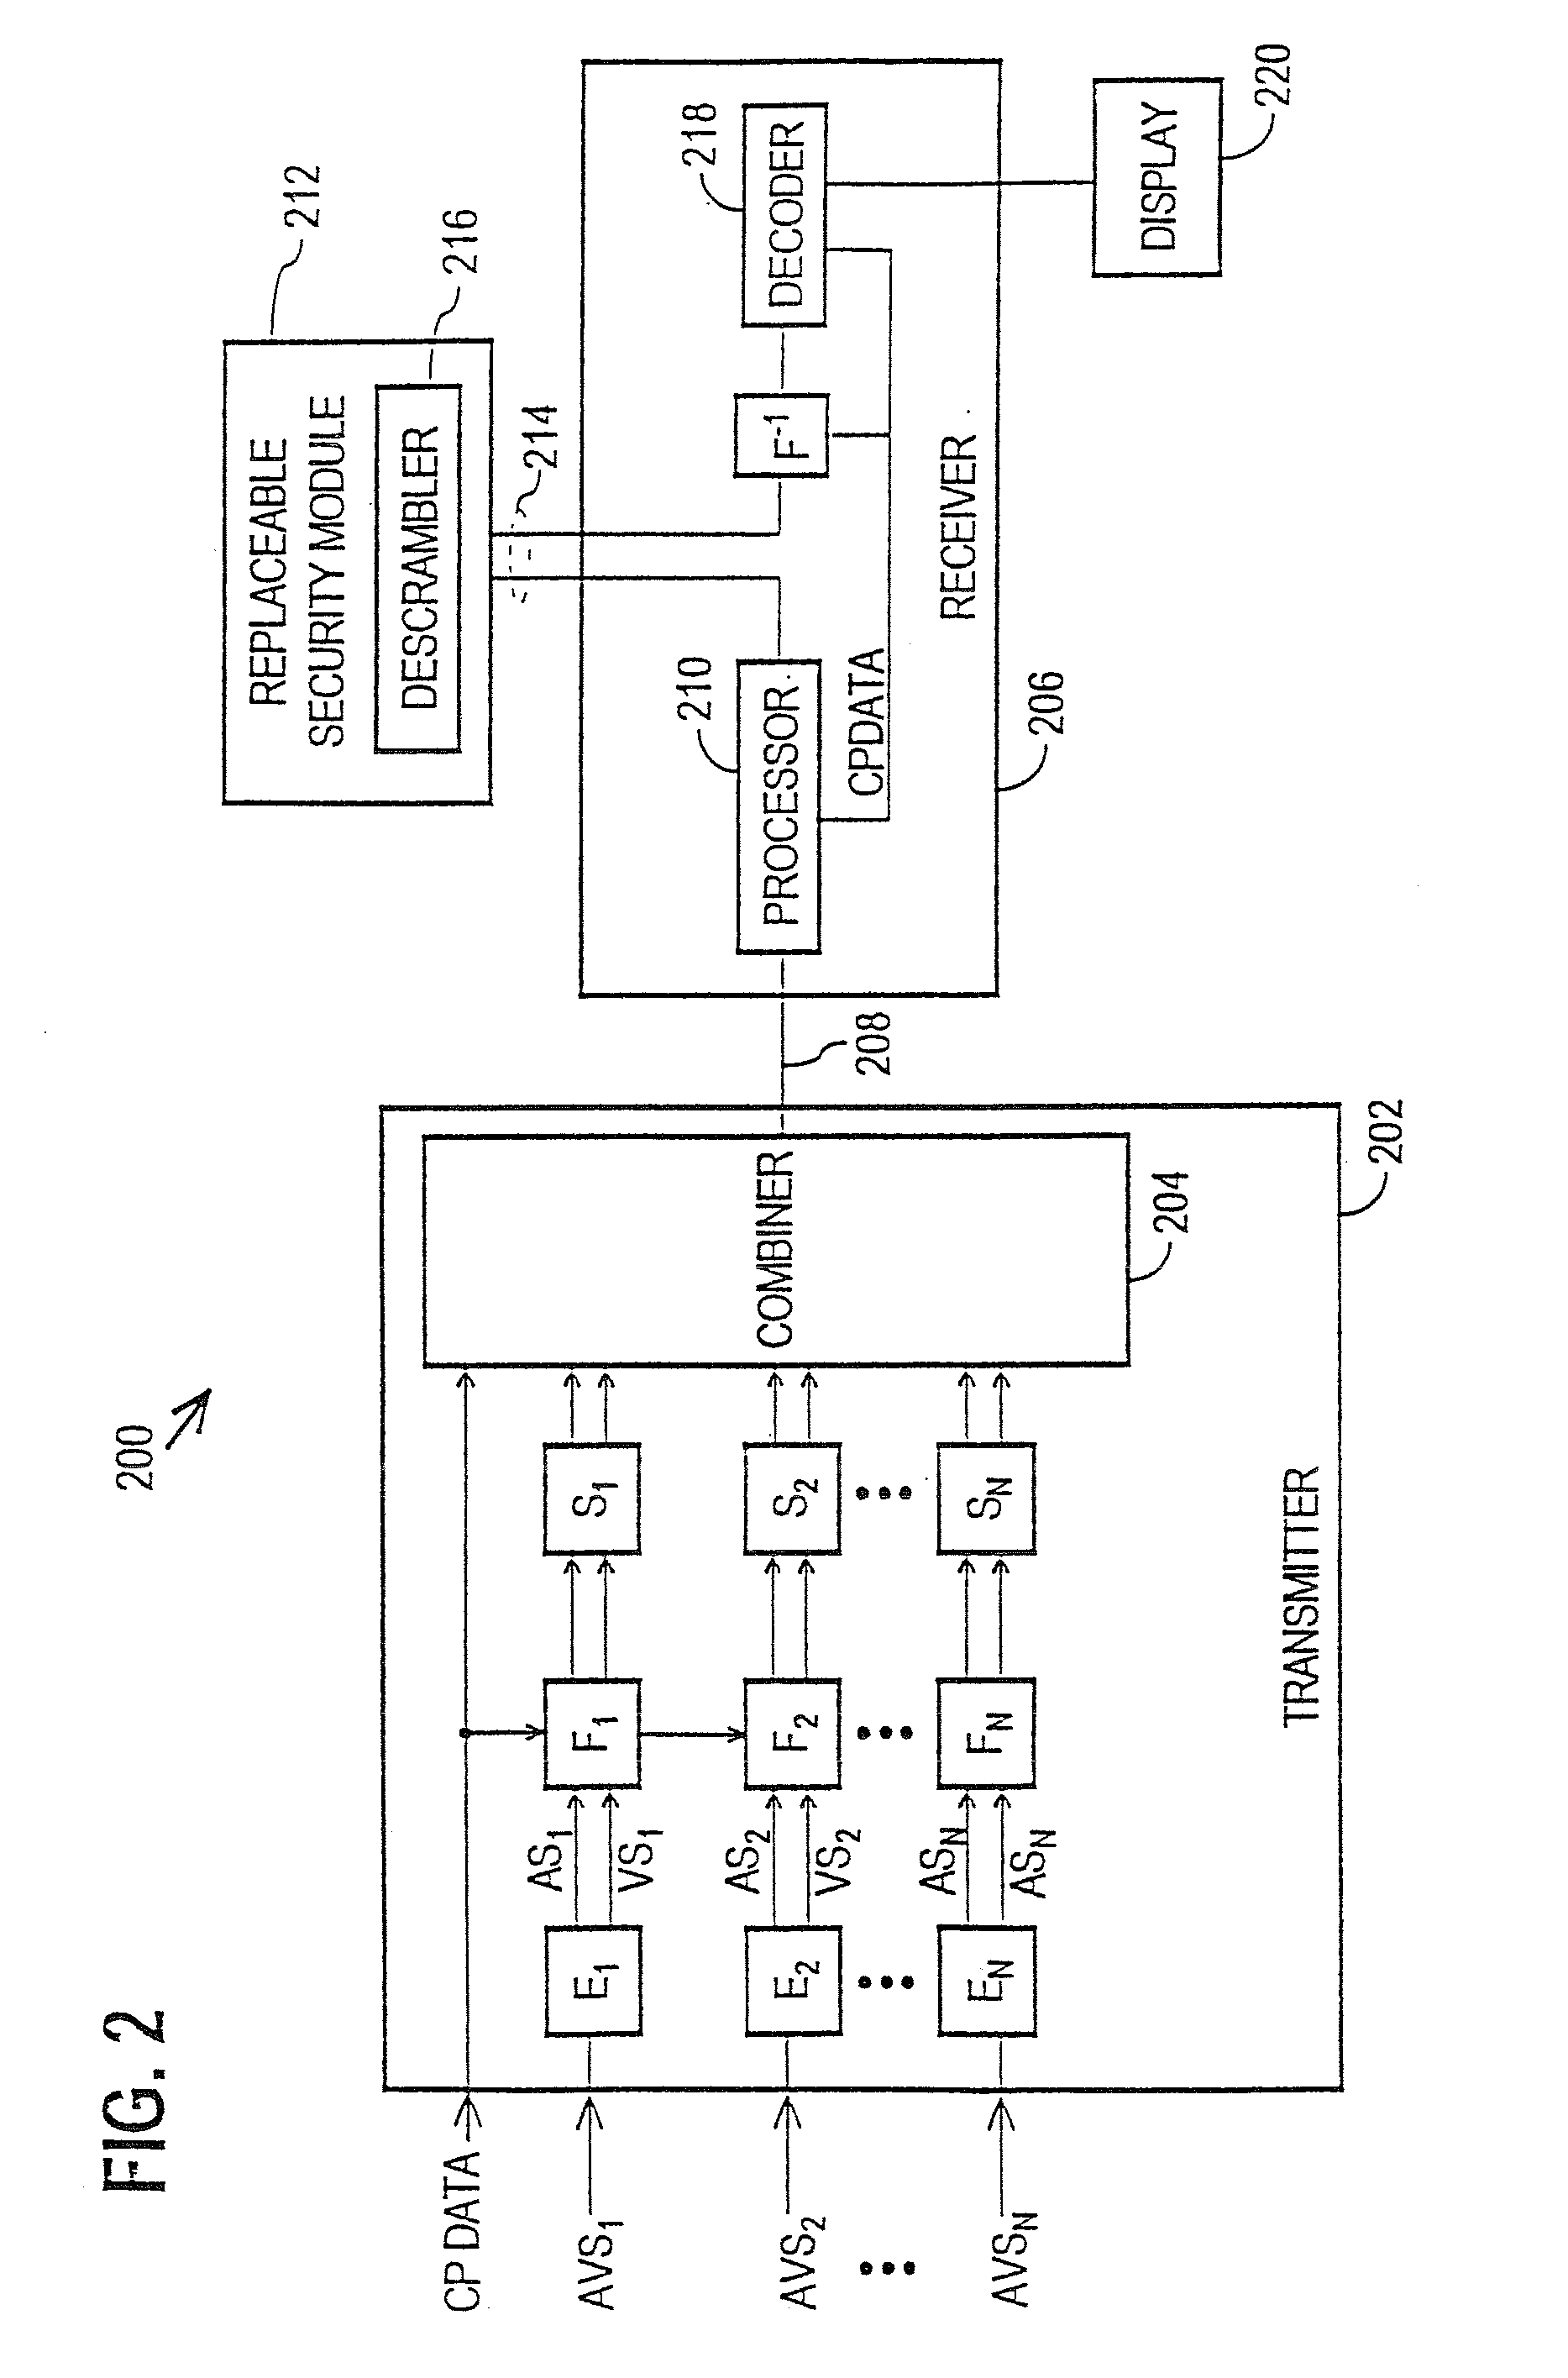 System and method for copy protection for digital signals